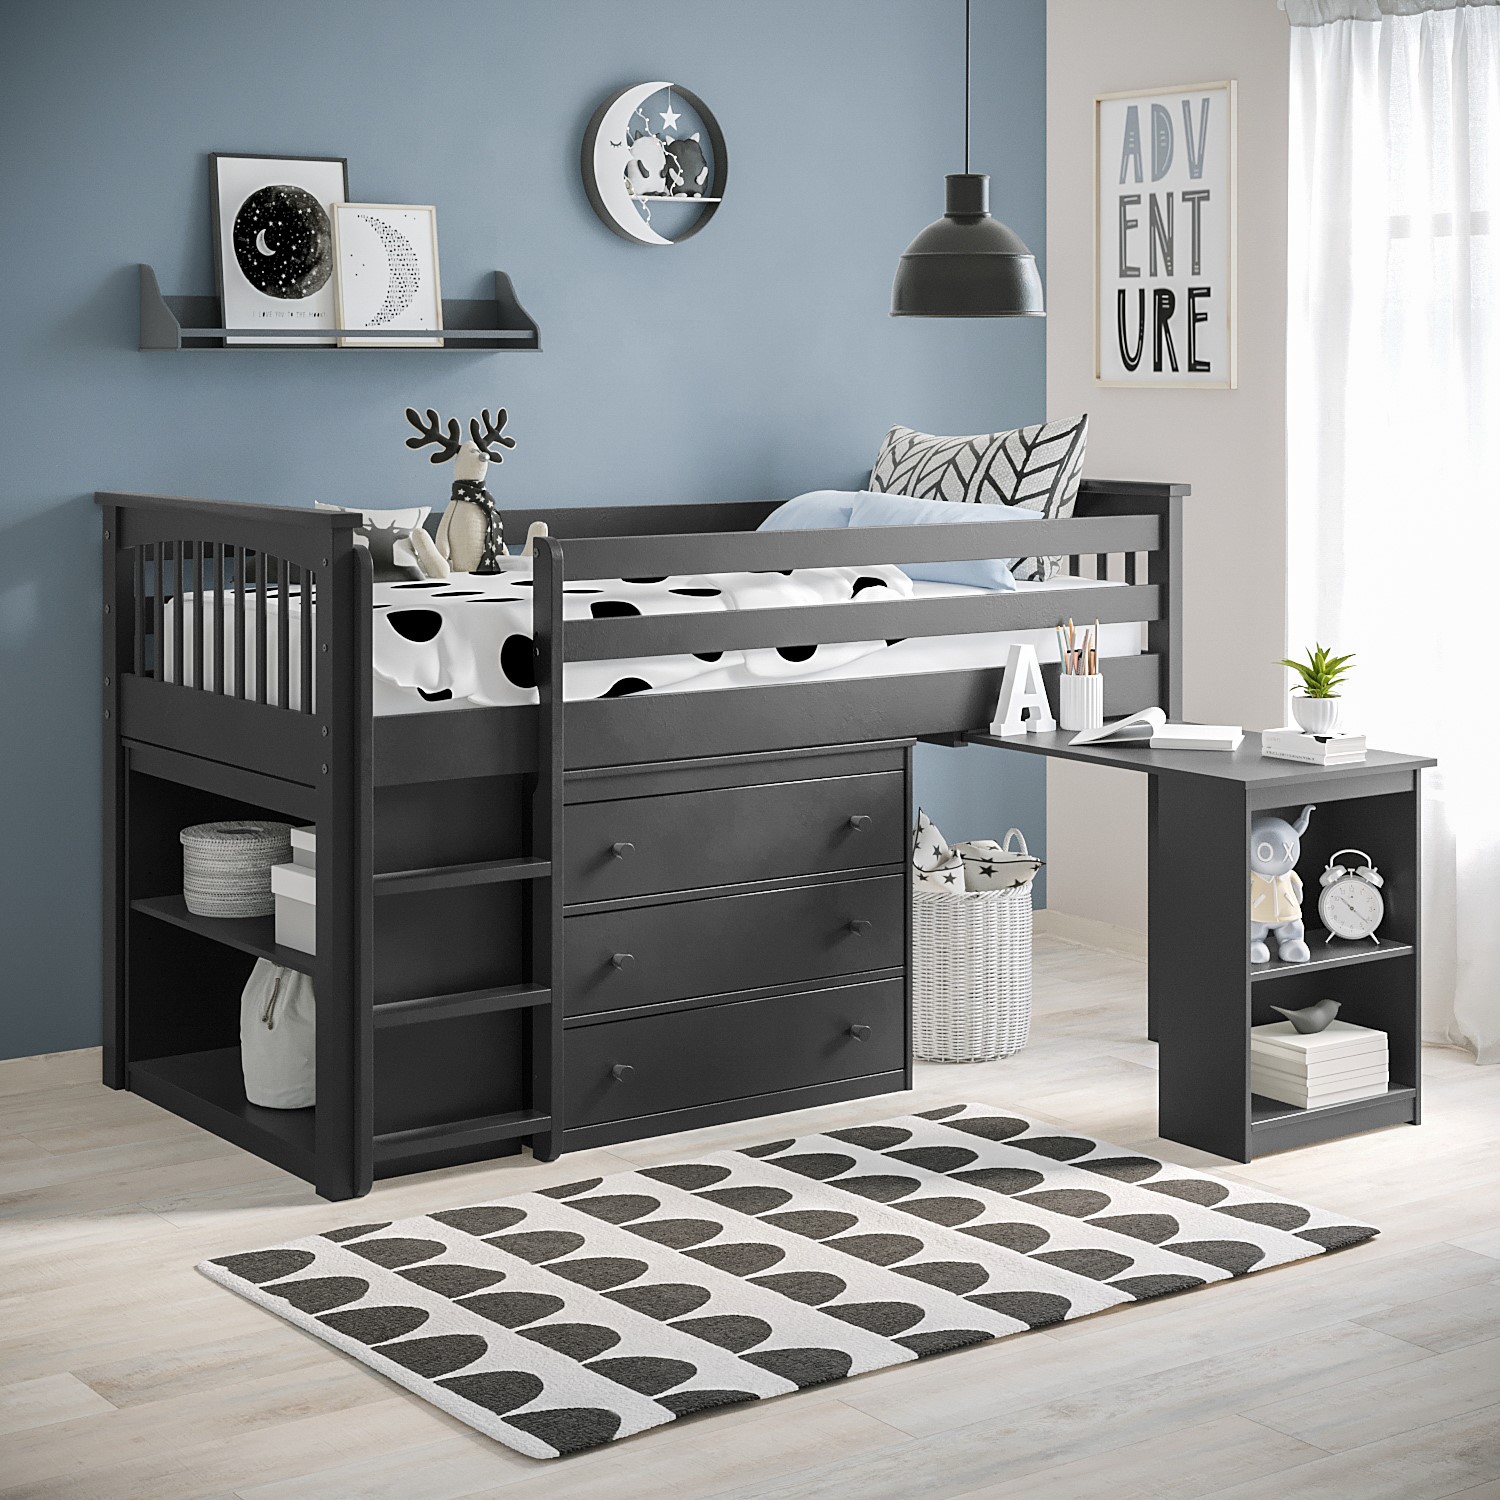 Dark Grey Cabin Bed With Pull Out Desk, Flip Out Desk Bed